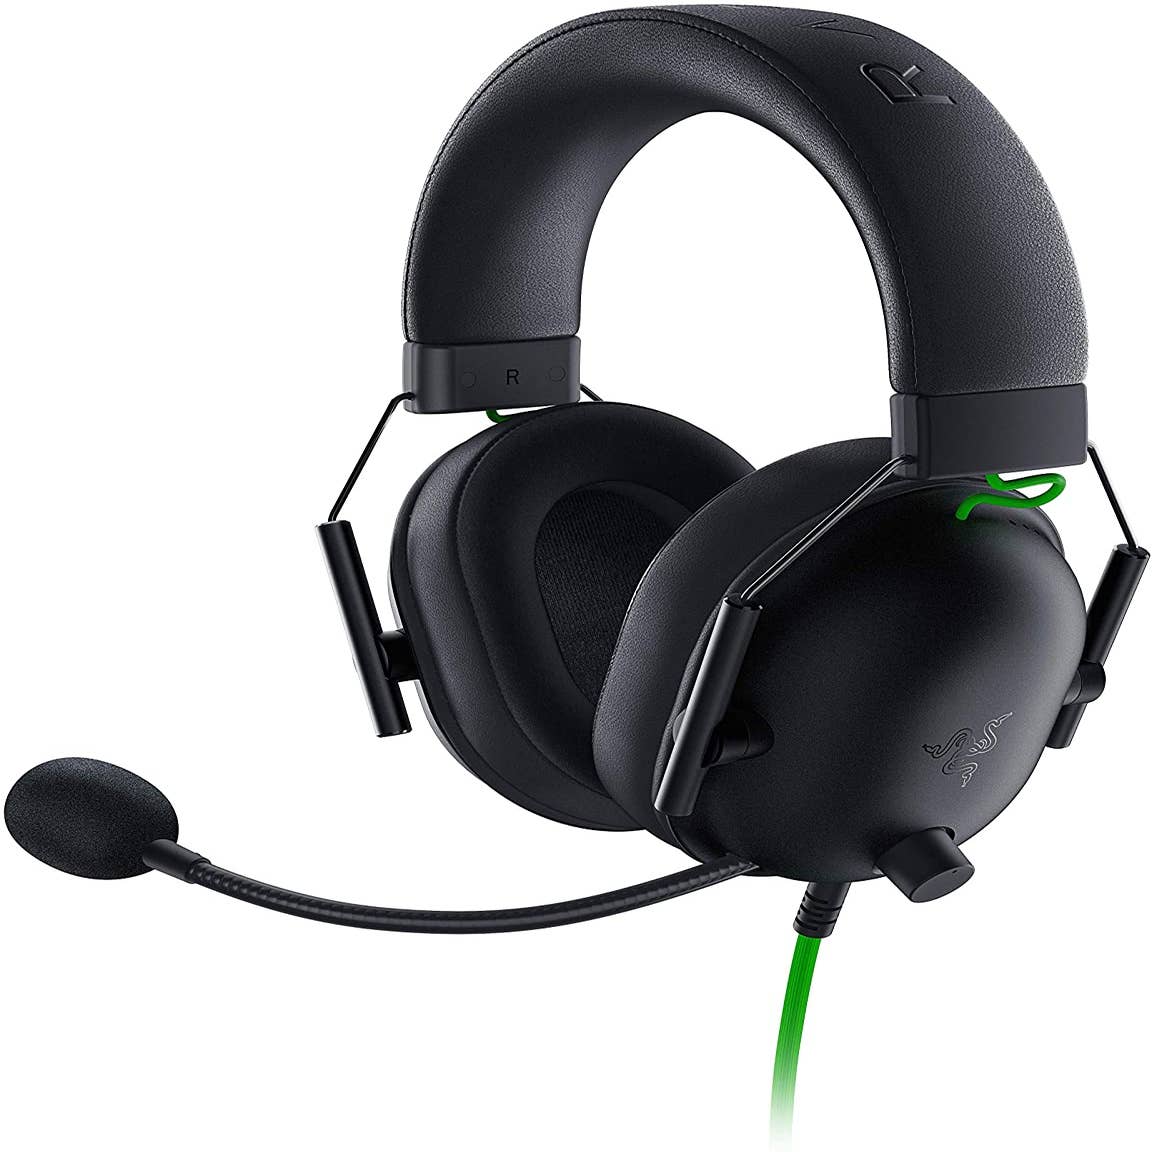 The Best Gaming Headsets of 2023 - Top Gaming Headset Reviews